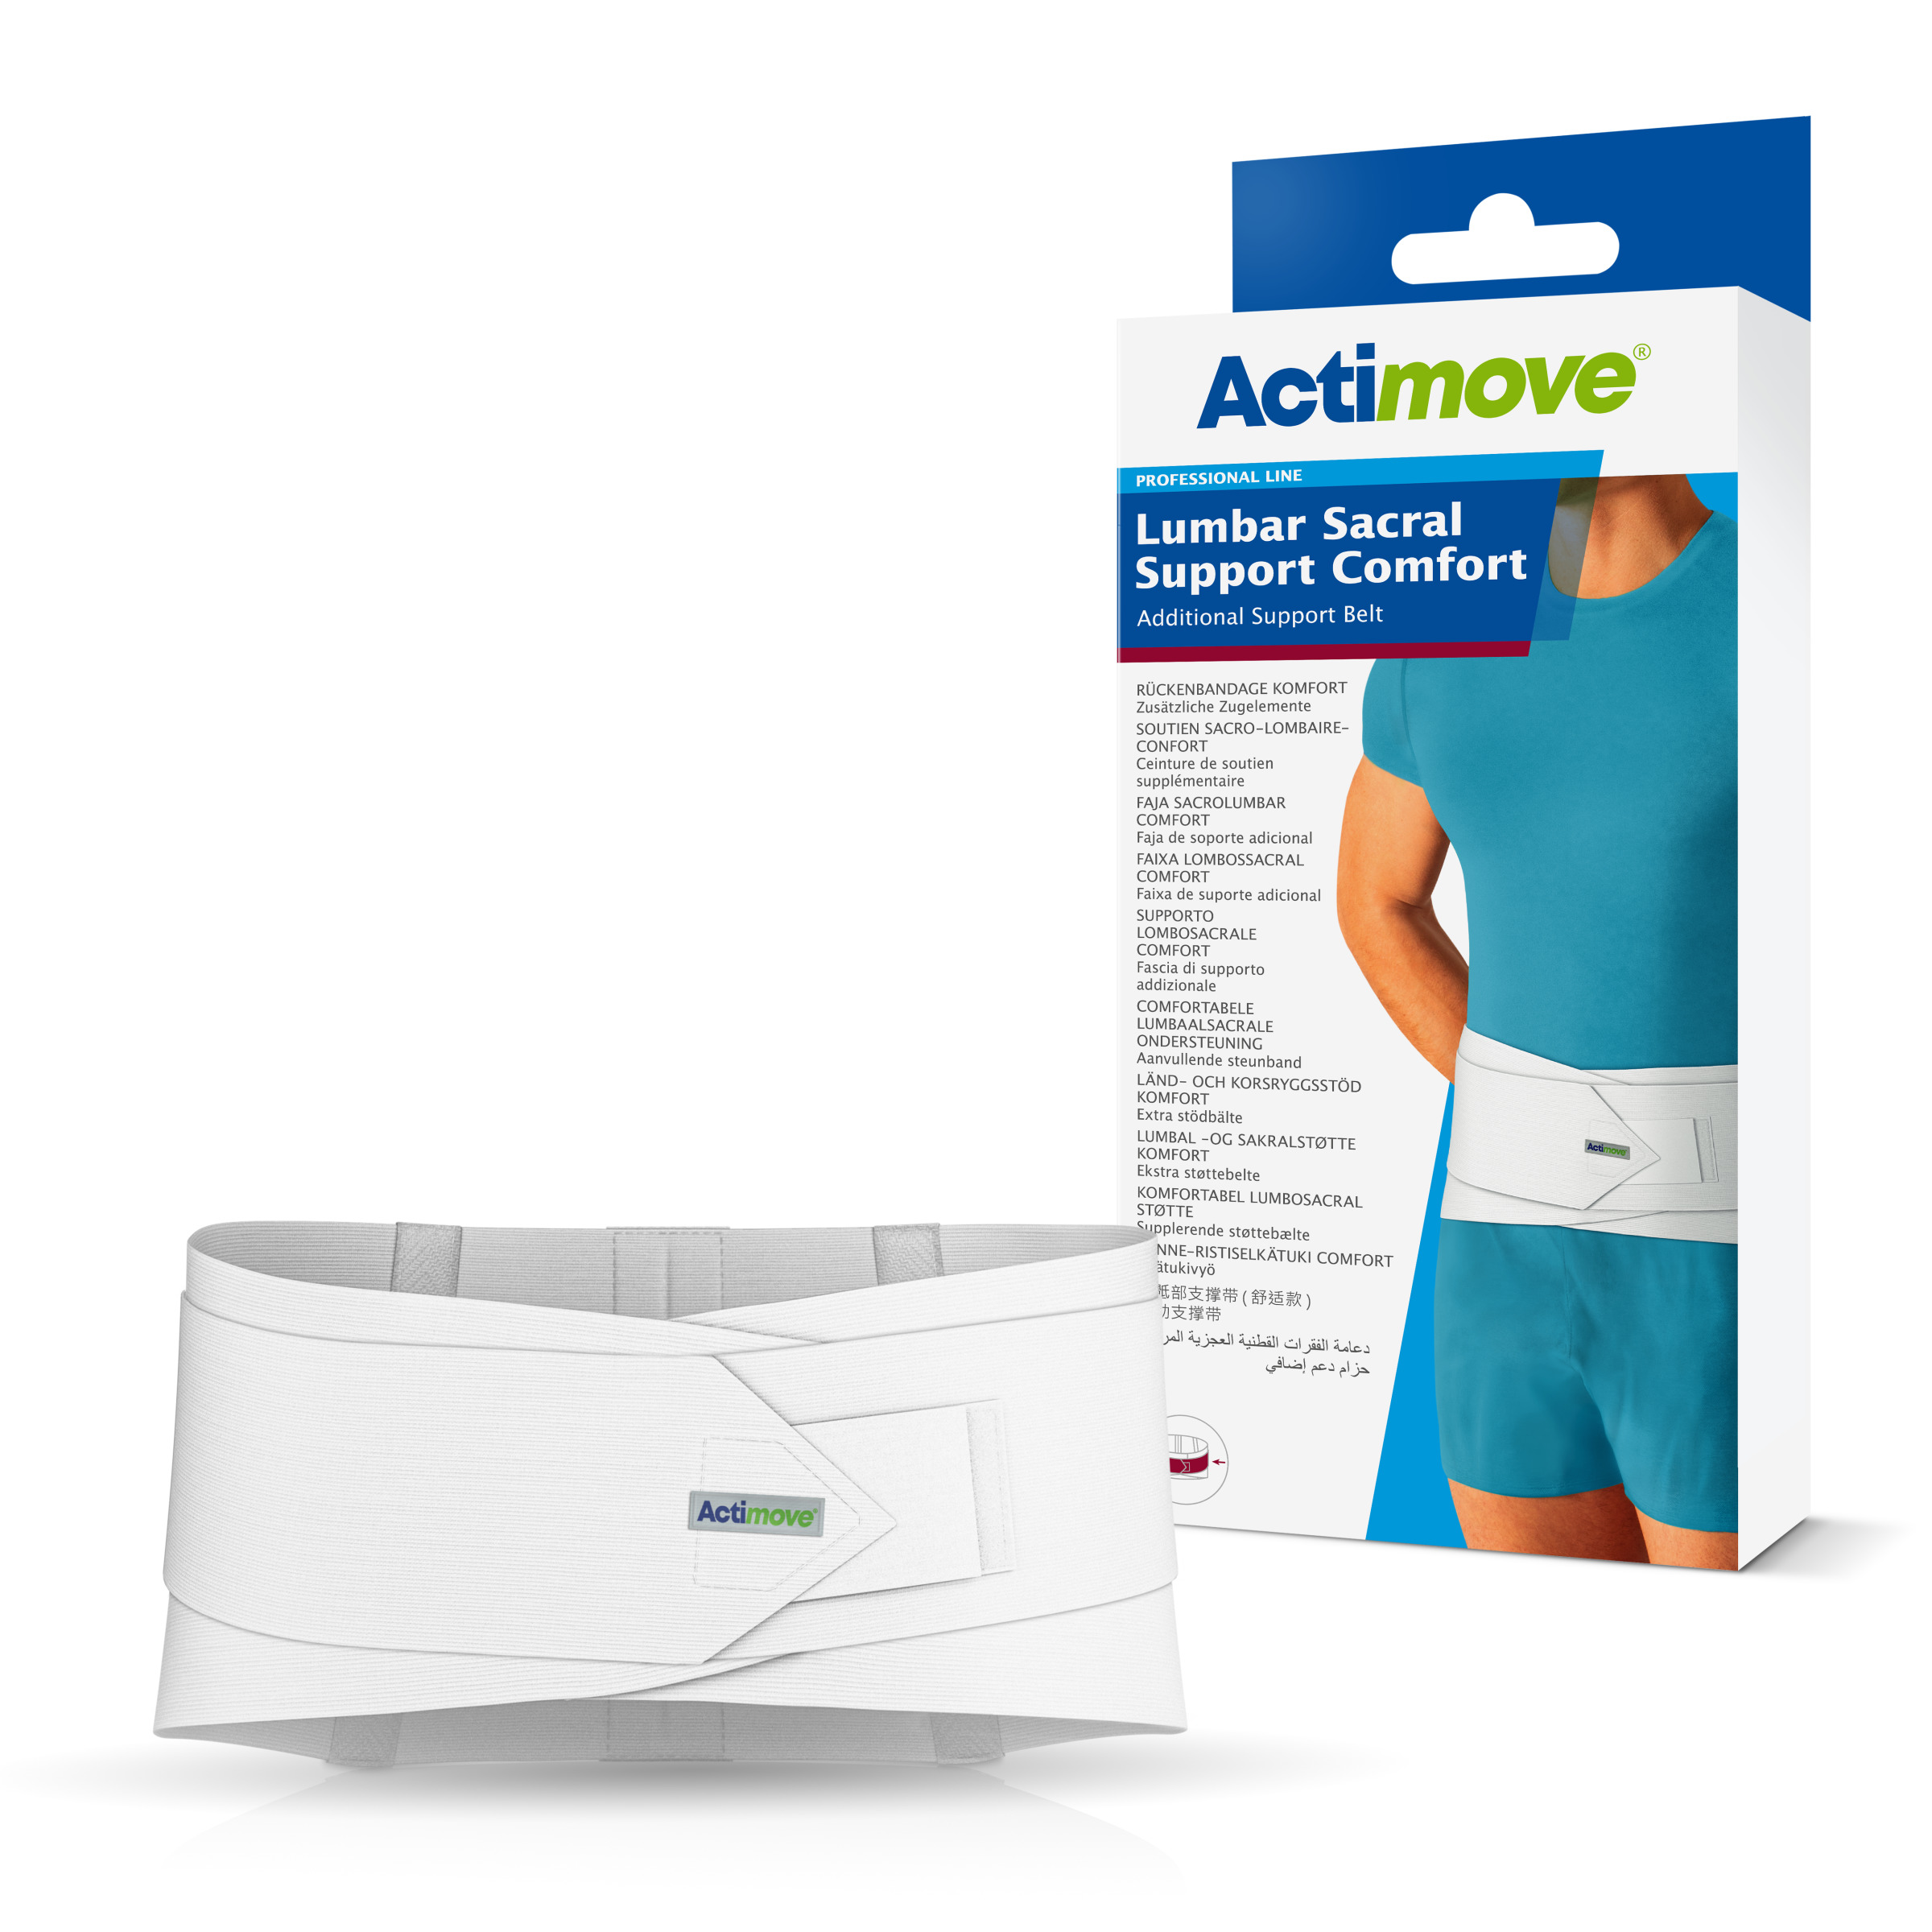 https://medical.essityusa.com/fileadmin/z-brands/Actimove/Medical.Essity_US/Product_Images/Actimove_Lumbar_Sacral_Support_Comfort_with_Additional_Support_Belt.jpg